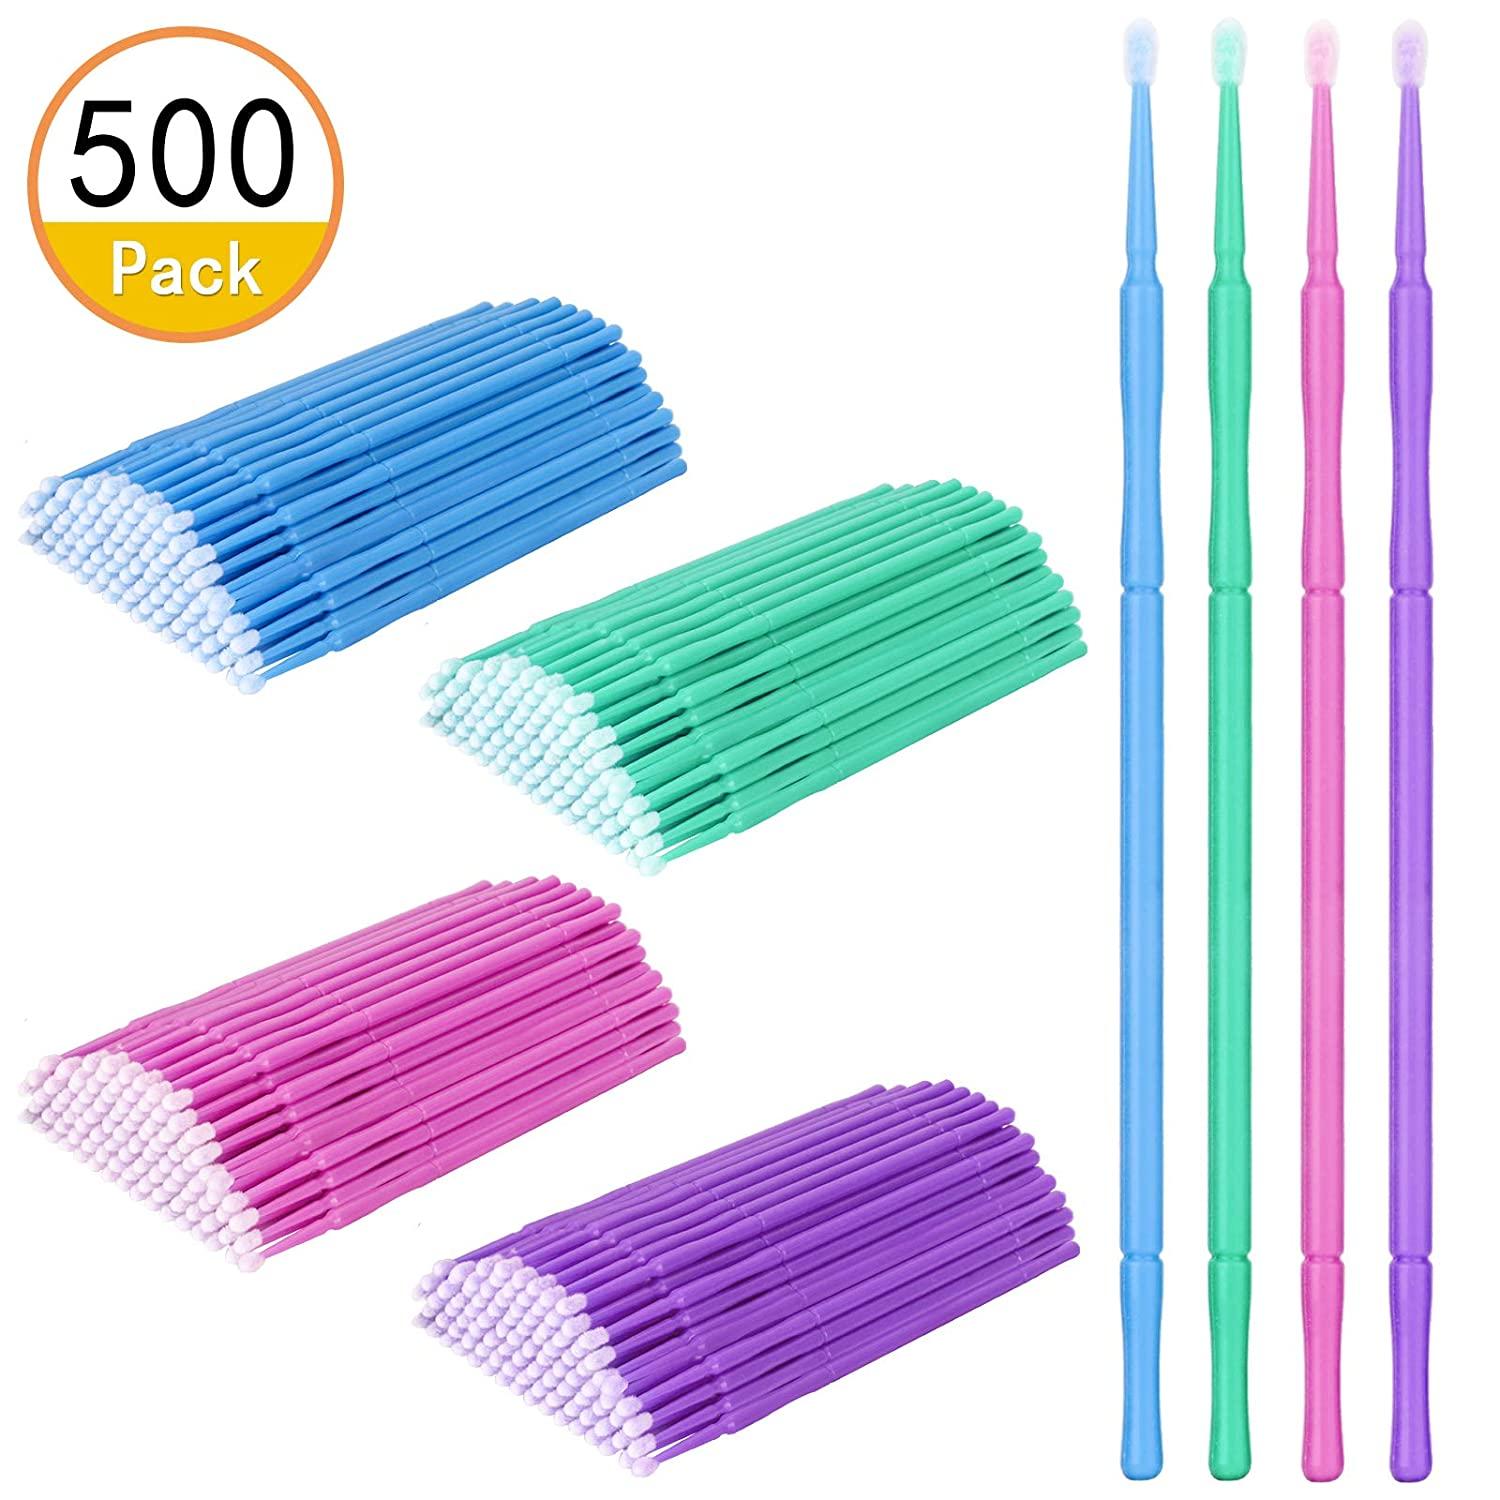 Disposable Micro Applicator Brush, Bendable Ultra fine 100 pack